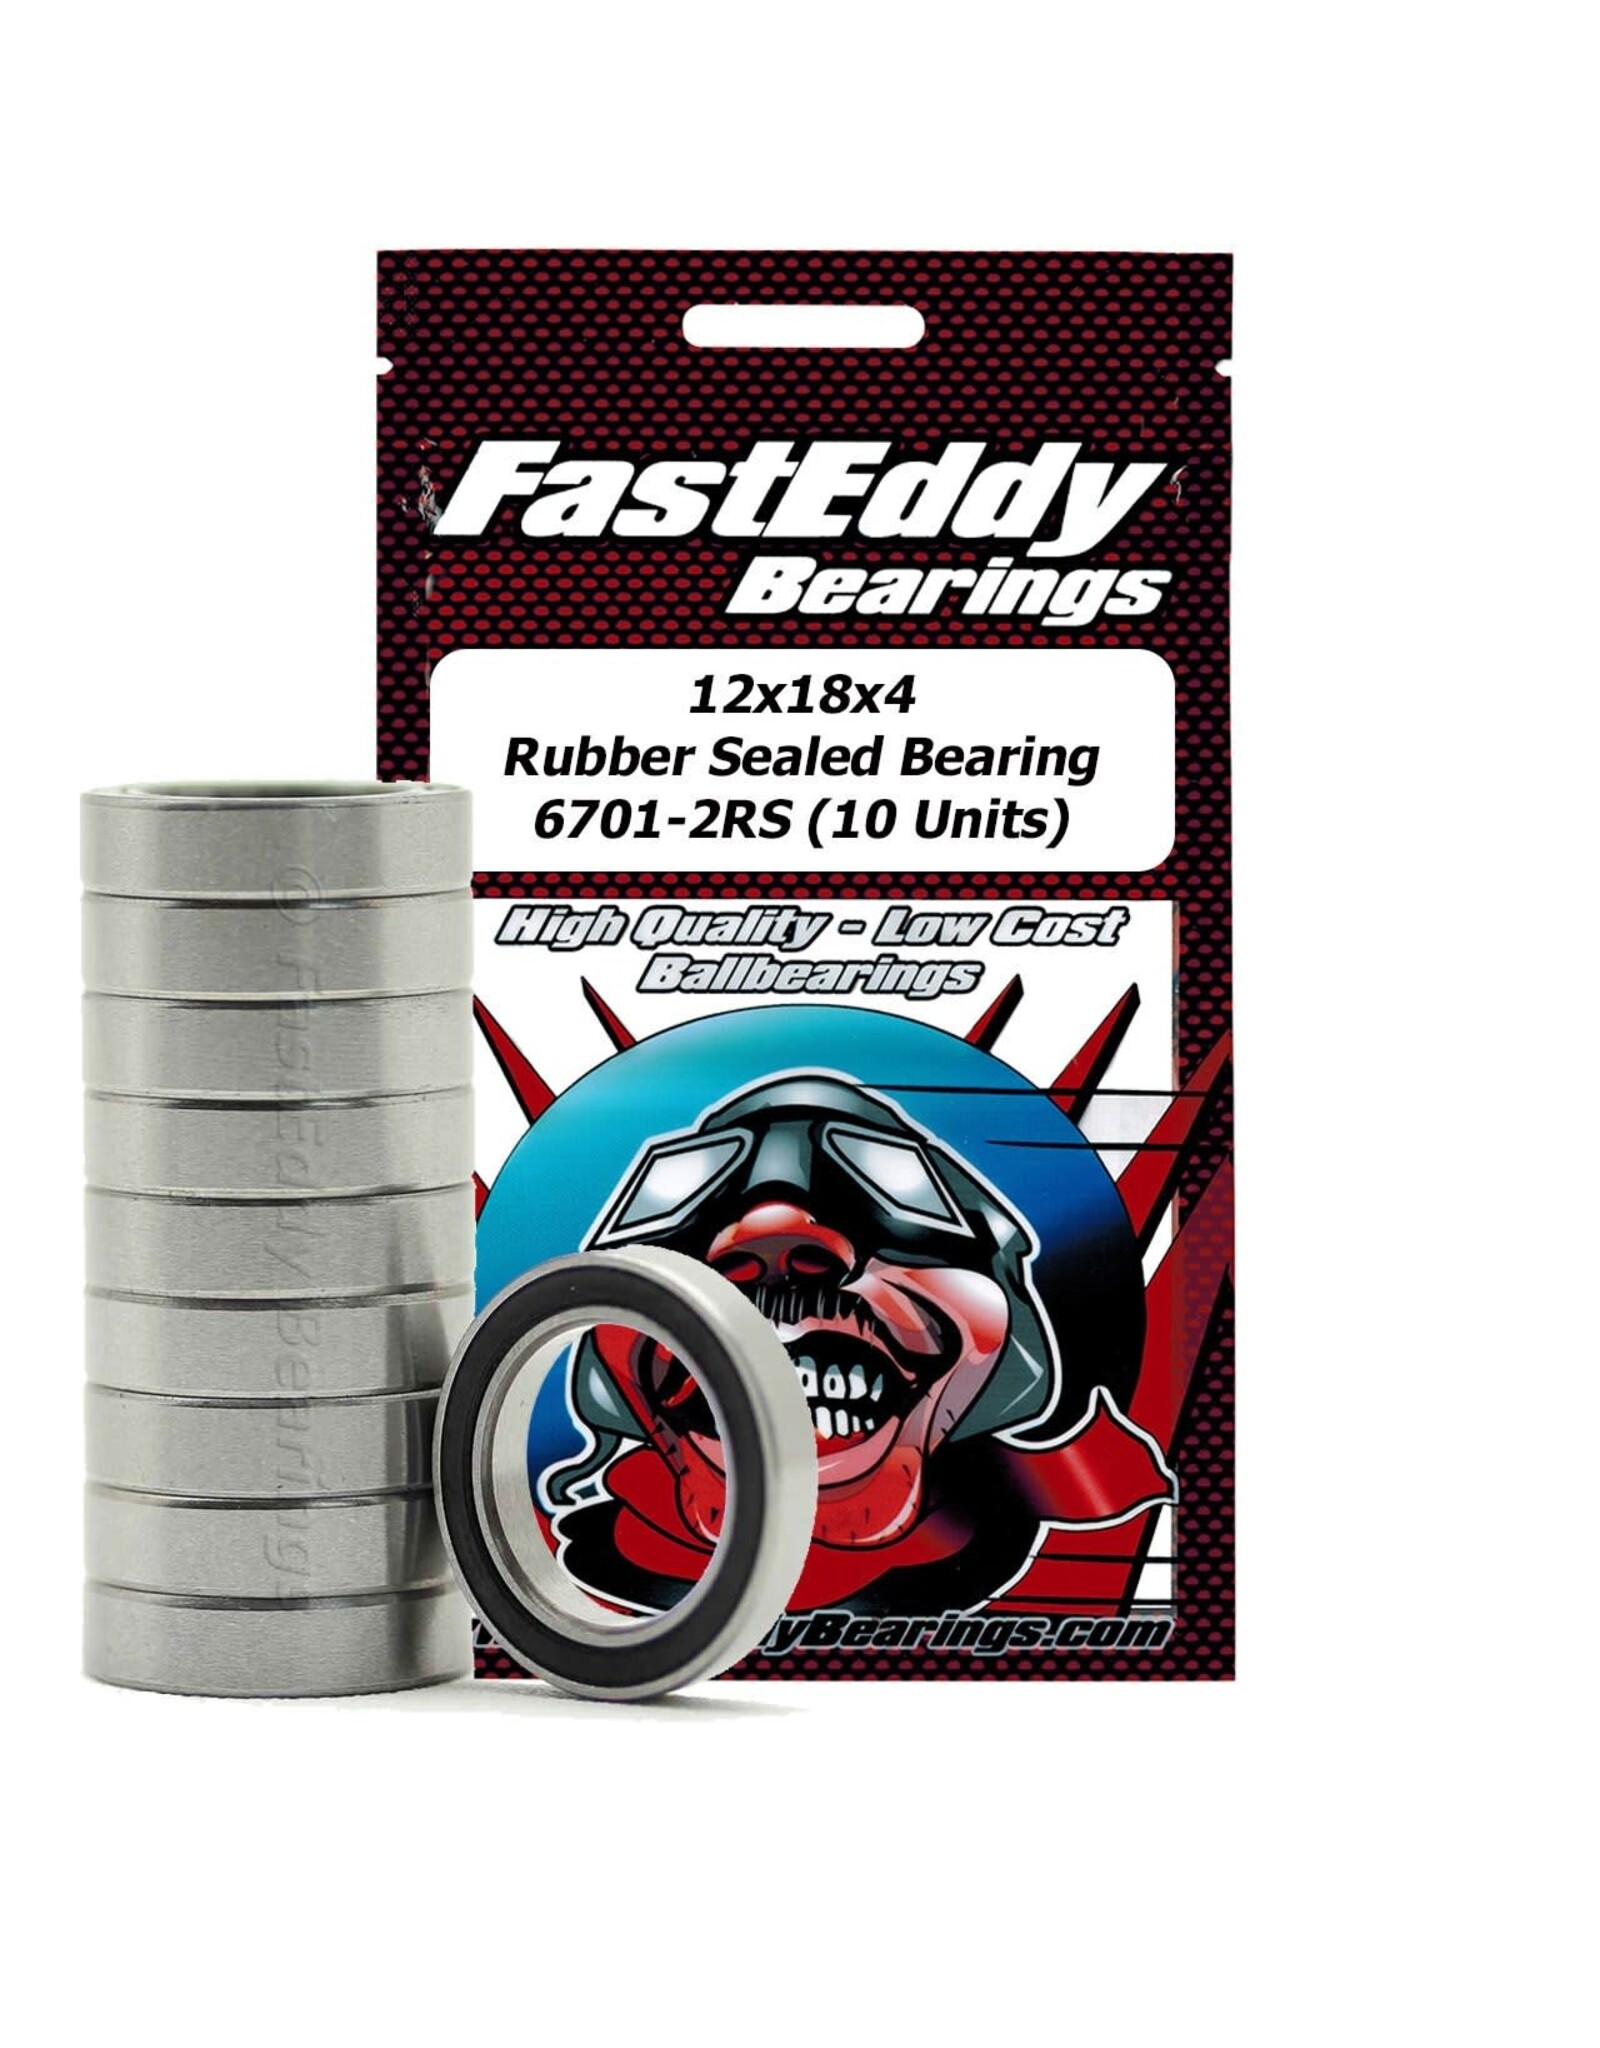 FastEddy Bearings 12x18x4mm Rubber Sealed Bearing (1)